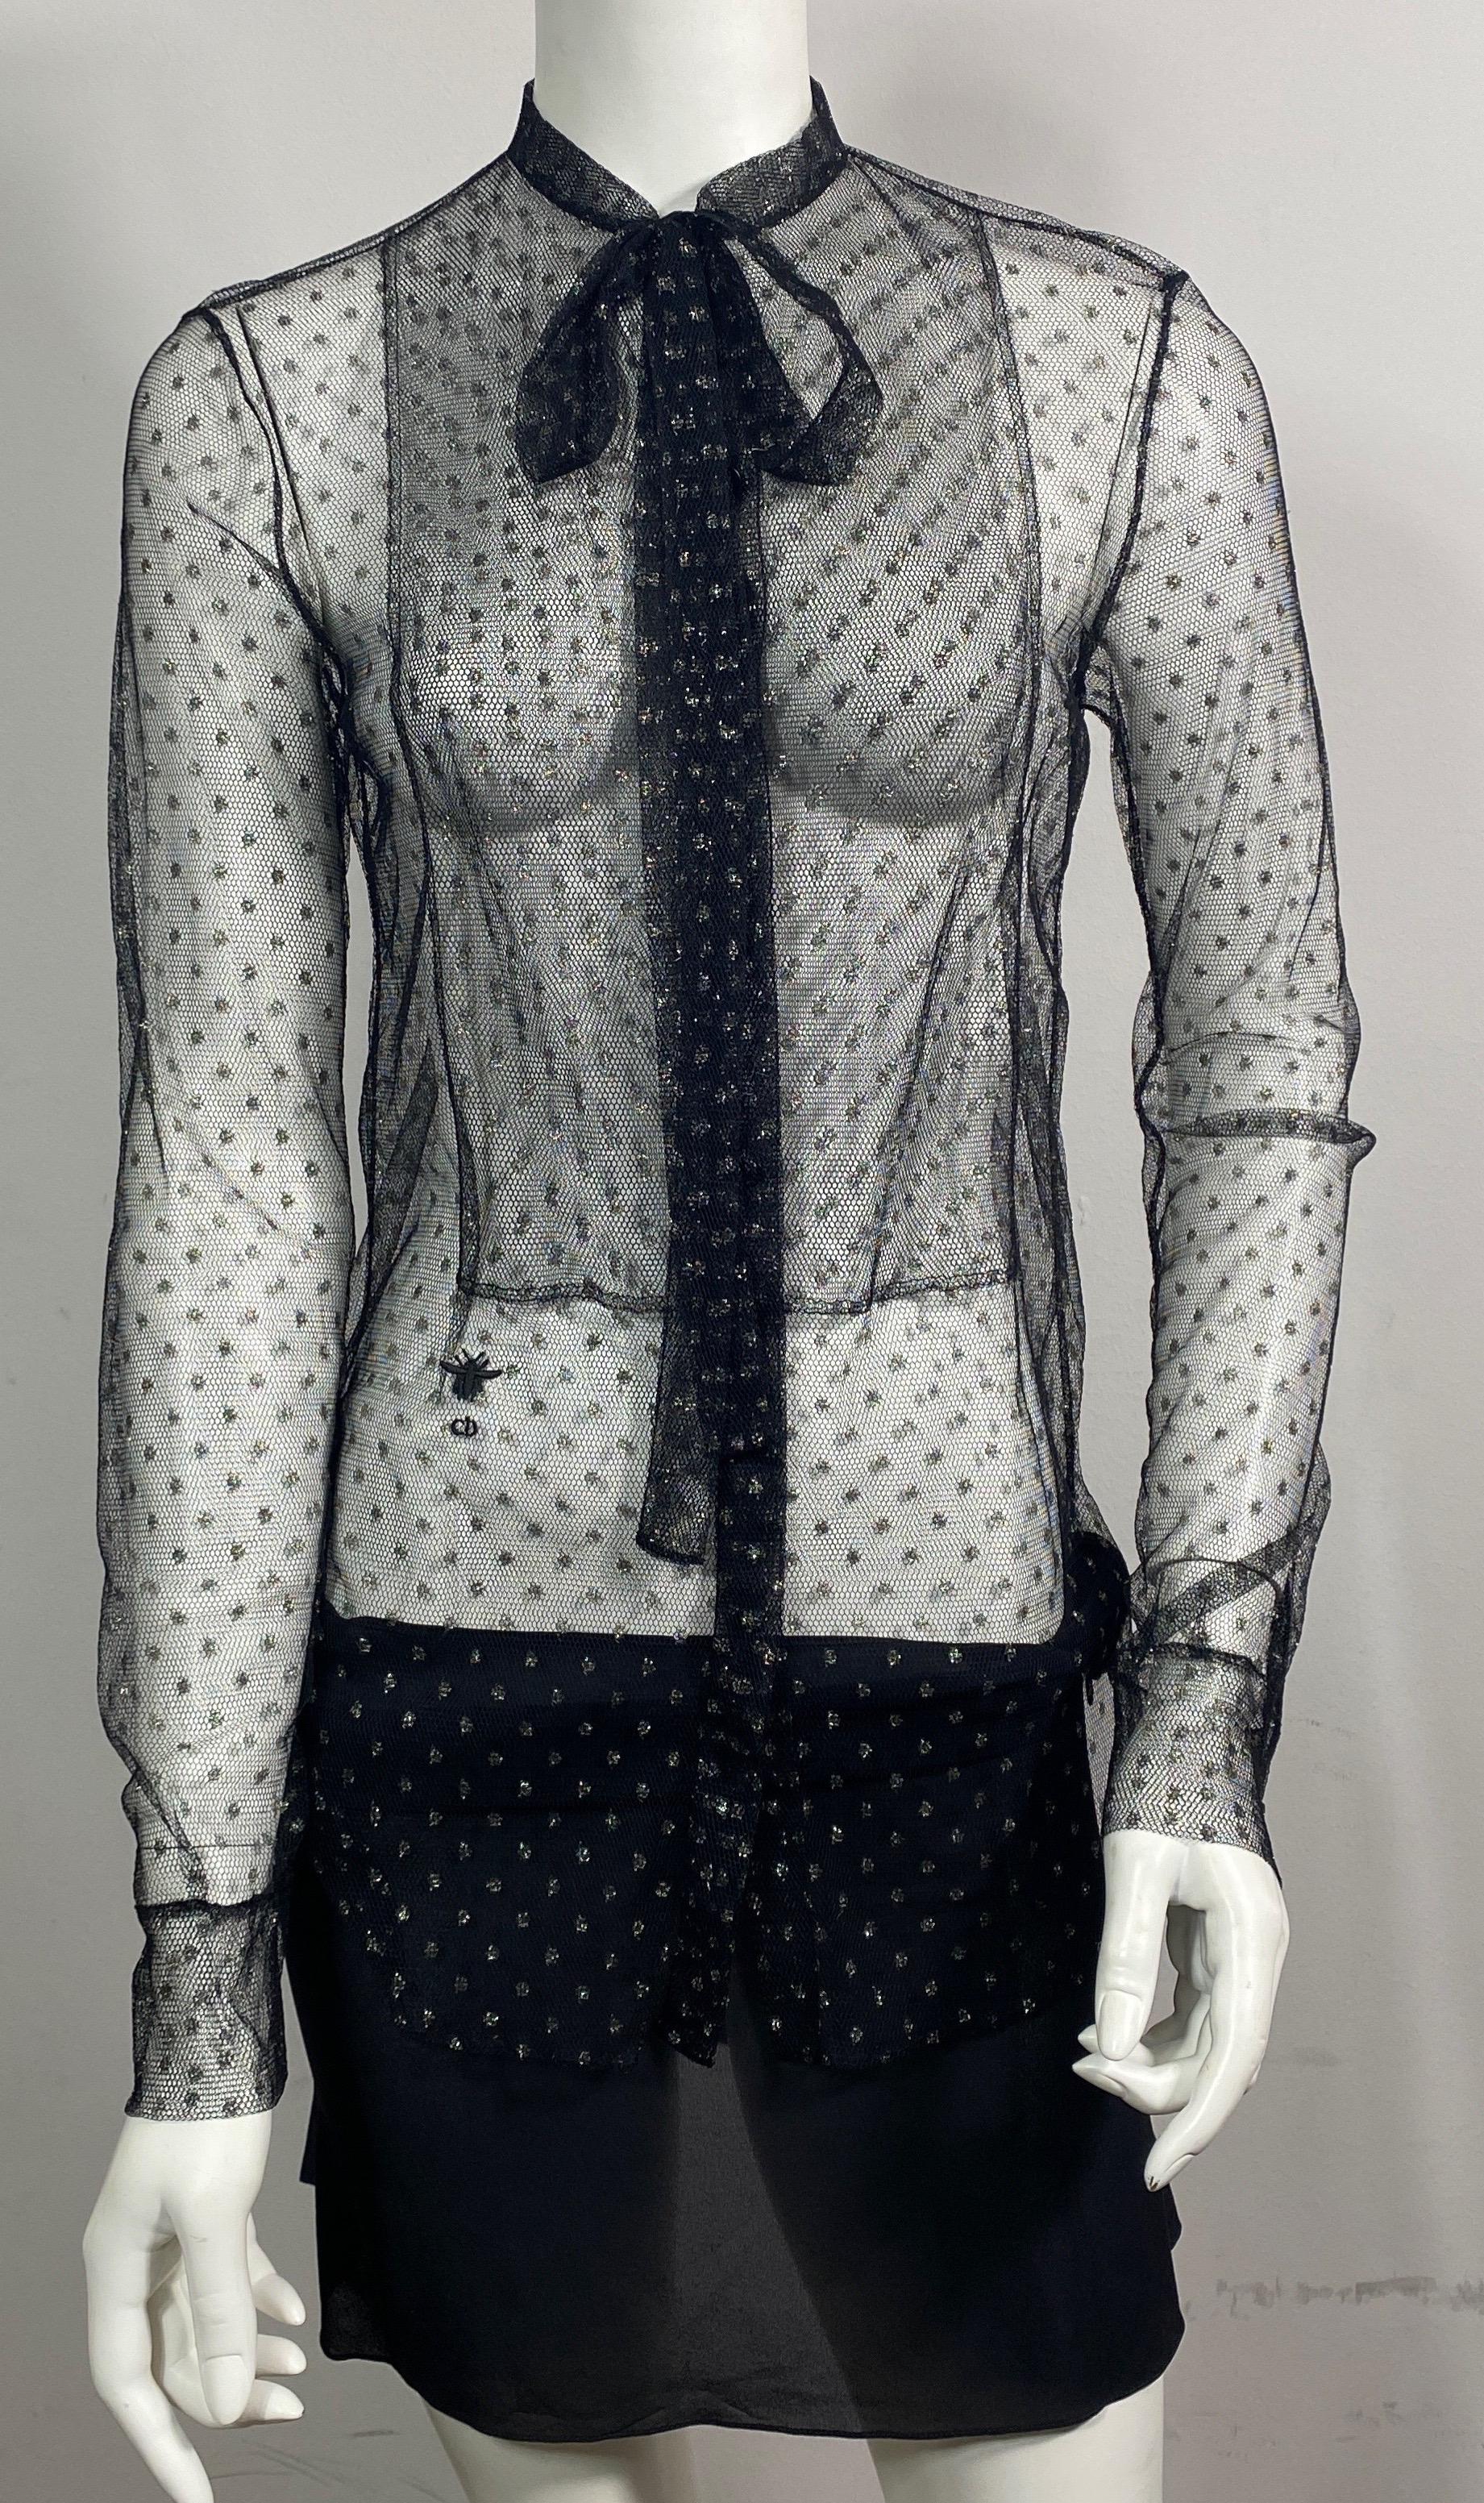 Christian Dior Black and Gold Mini Polka Dot Sheer Mesh Top - Size Small For Sale 11